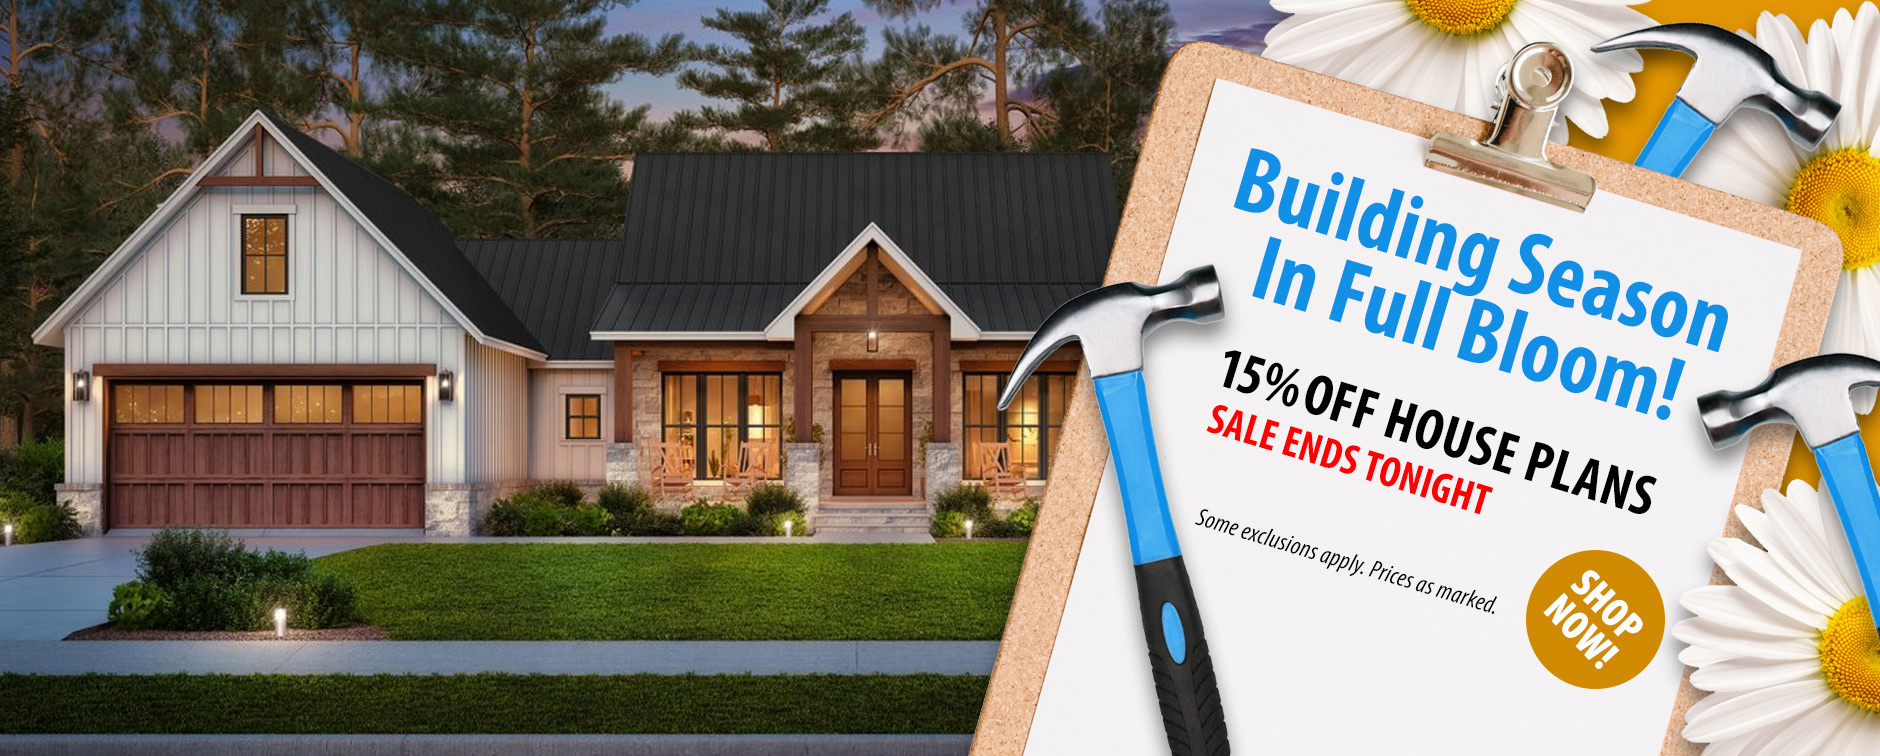 Building Season in Full Bloom: Take 15% Off House Plans - Sale Ends Tonight